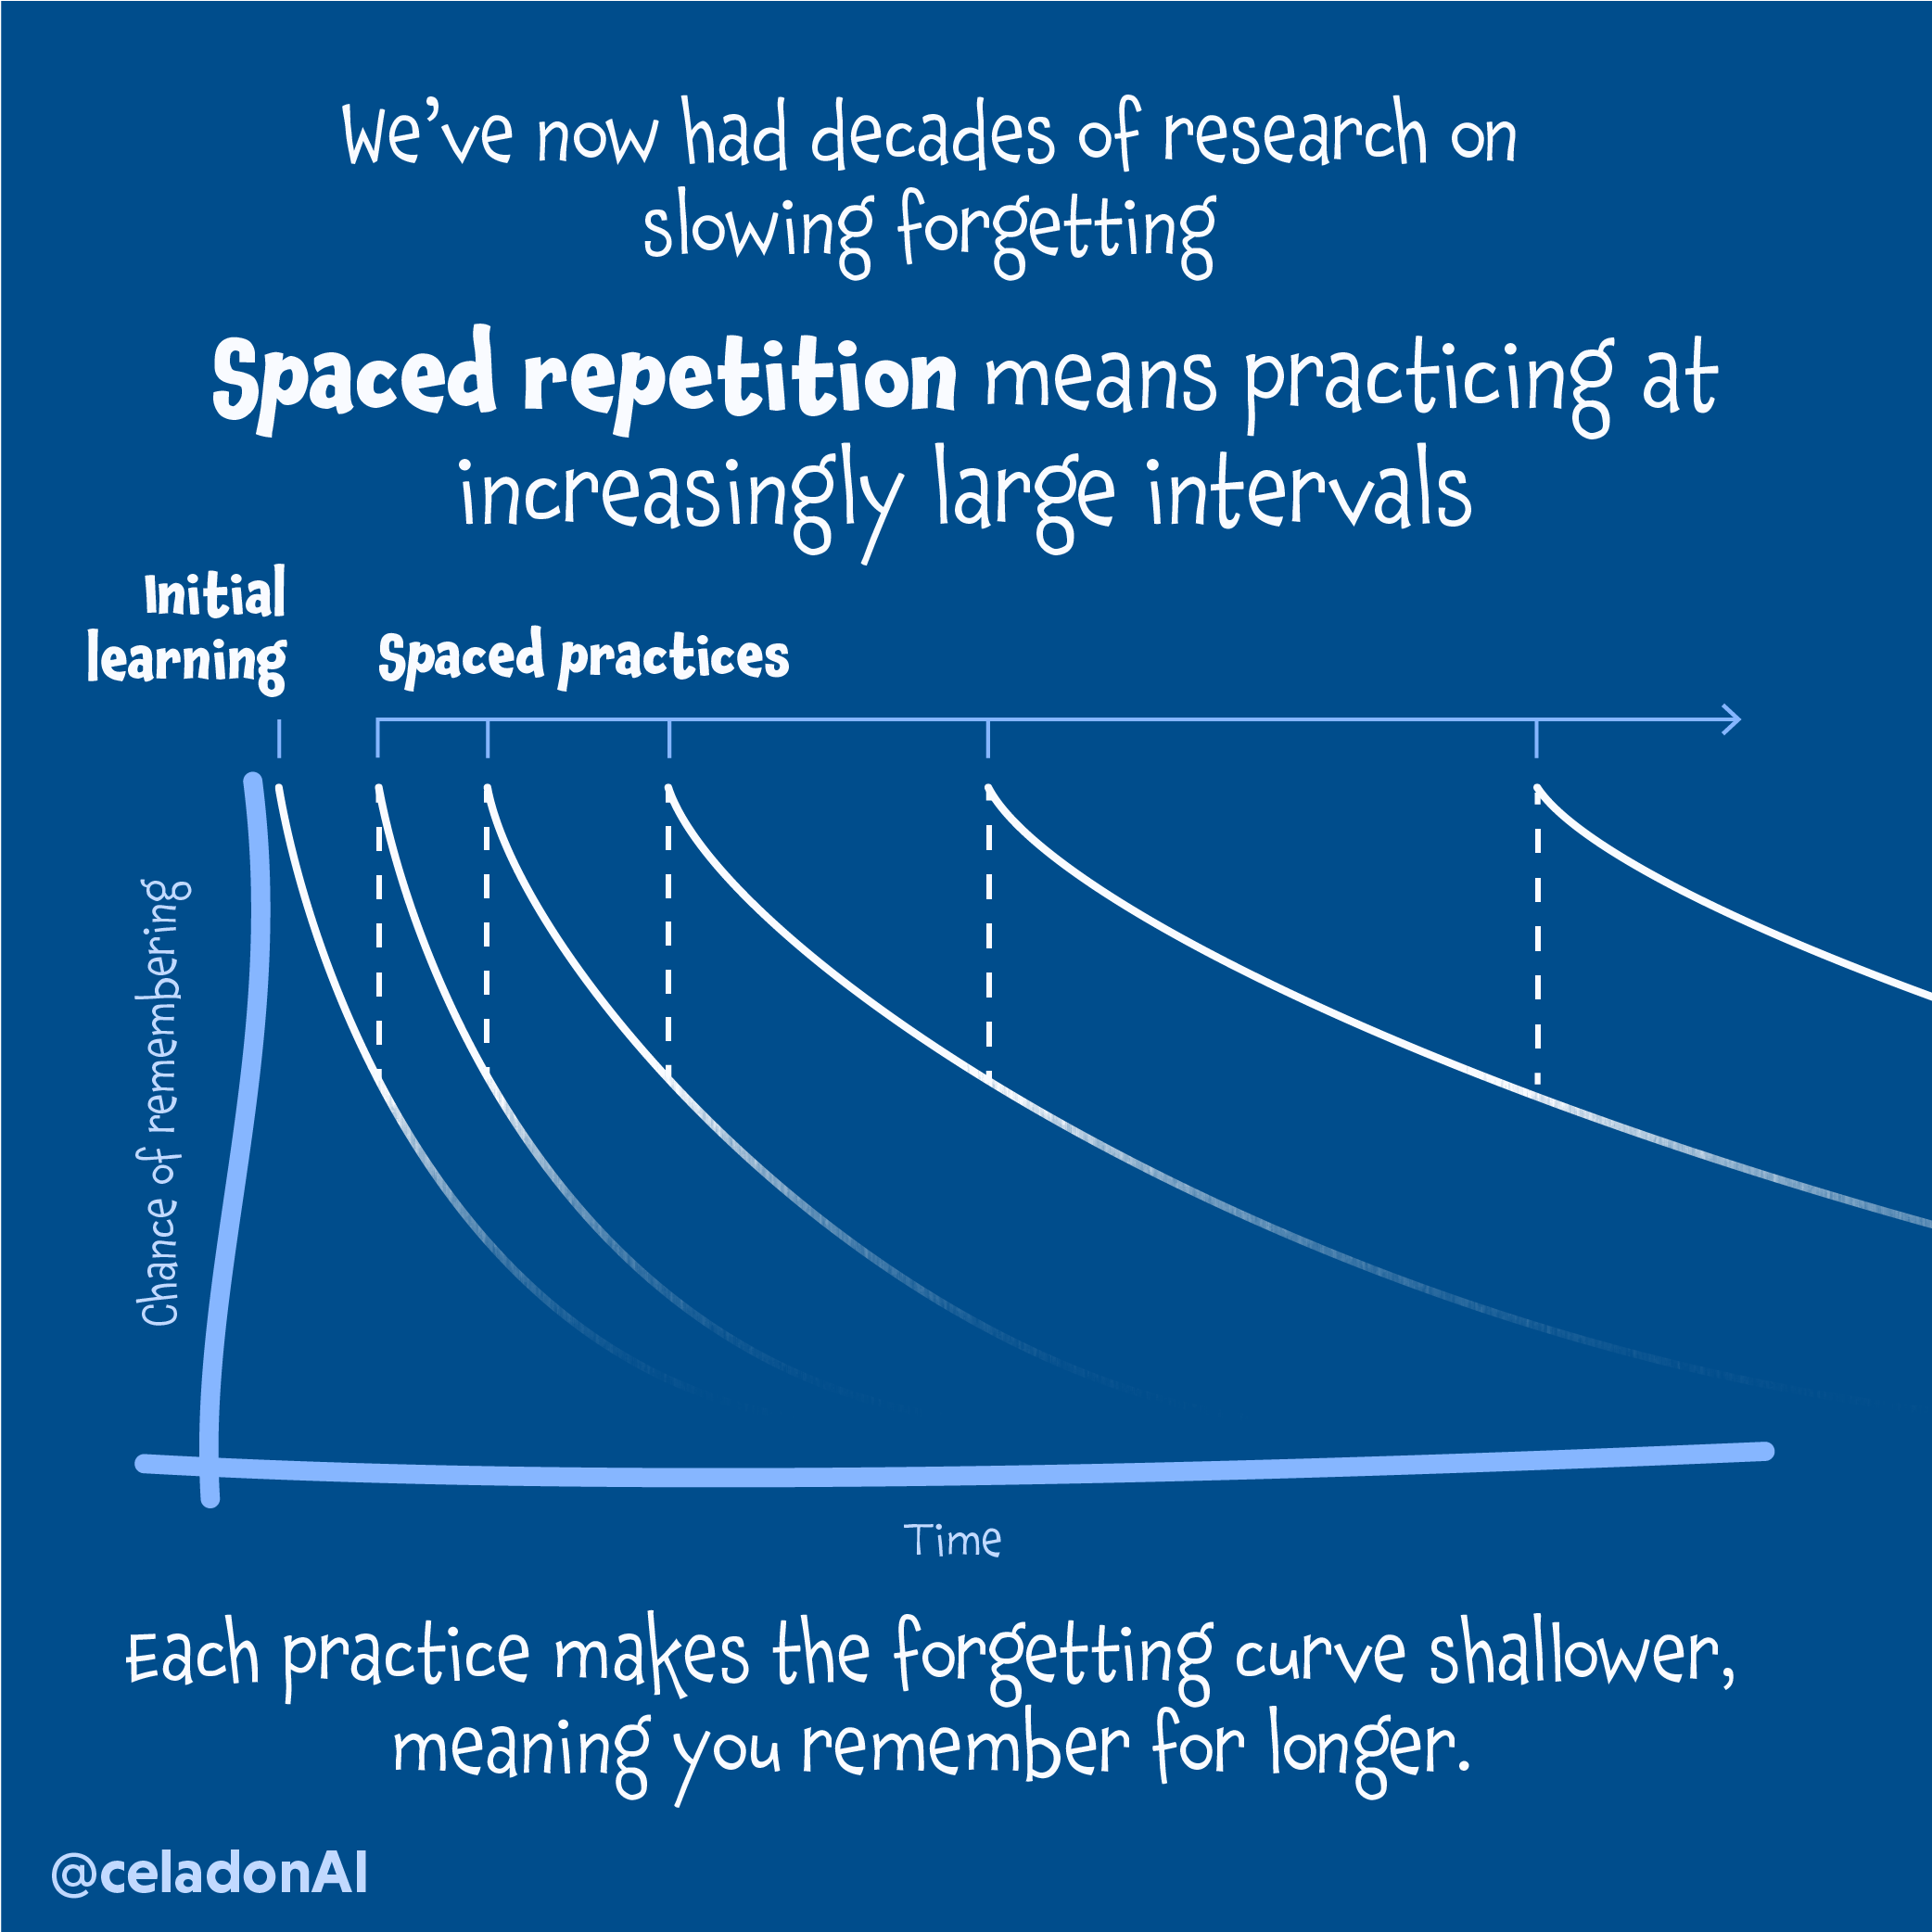 Spaced repetition means practicing at increasingly large intervals